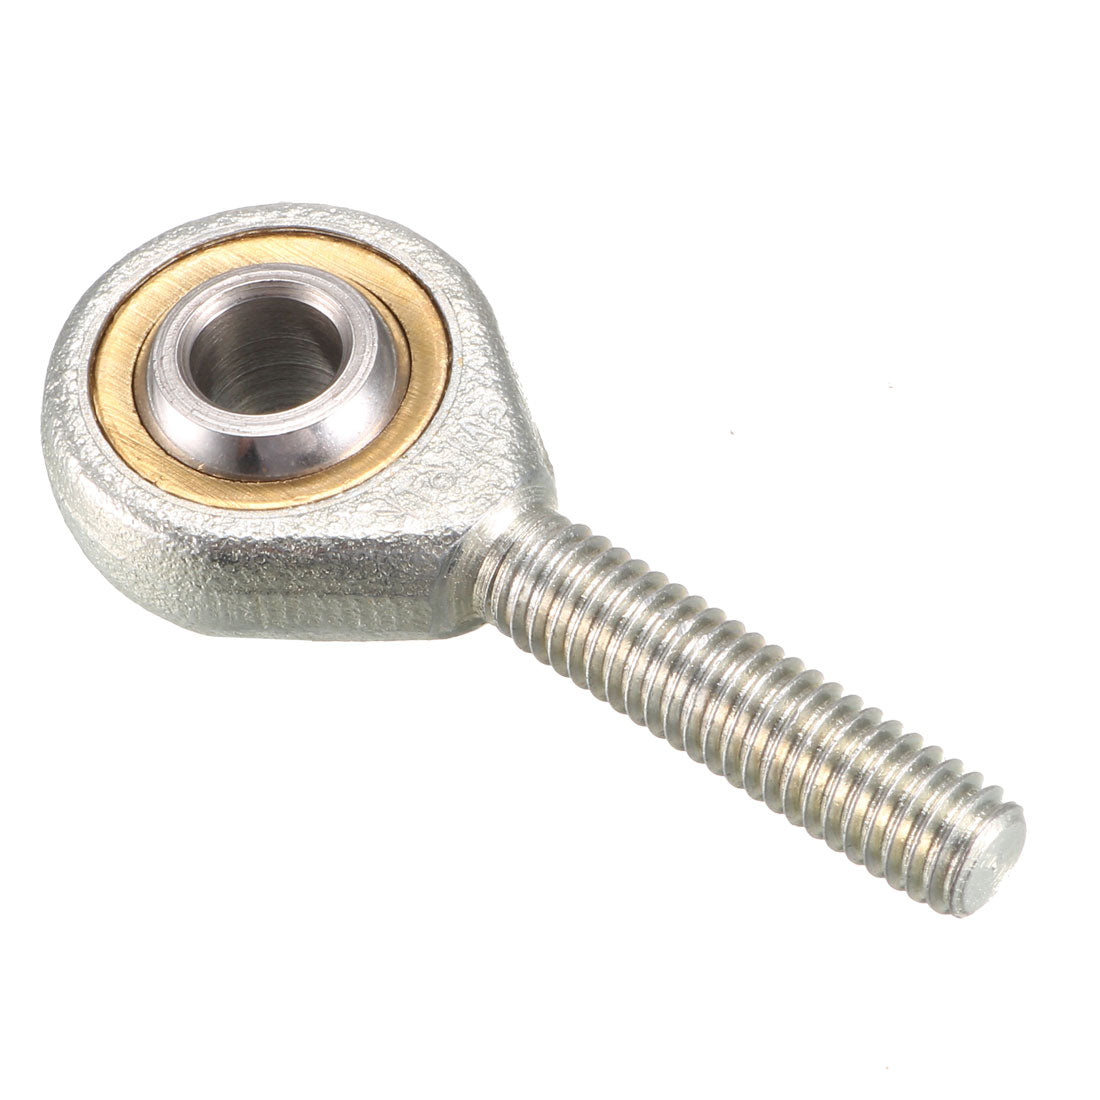 uxcell Uxcell 6mm Rod End Bearing M6x1.0mm Rod Ends Ball Joint Male Left Hand Thread